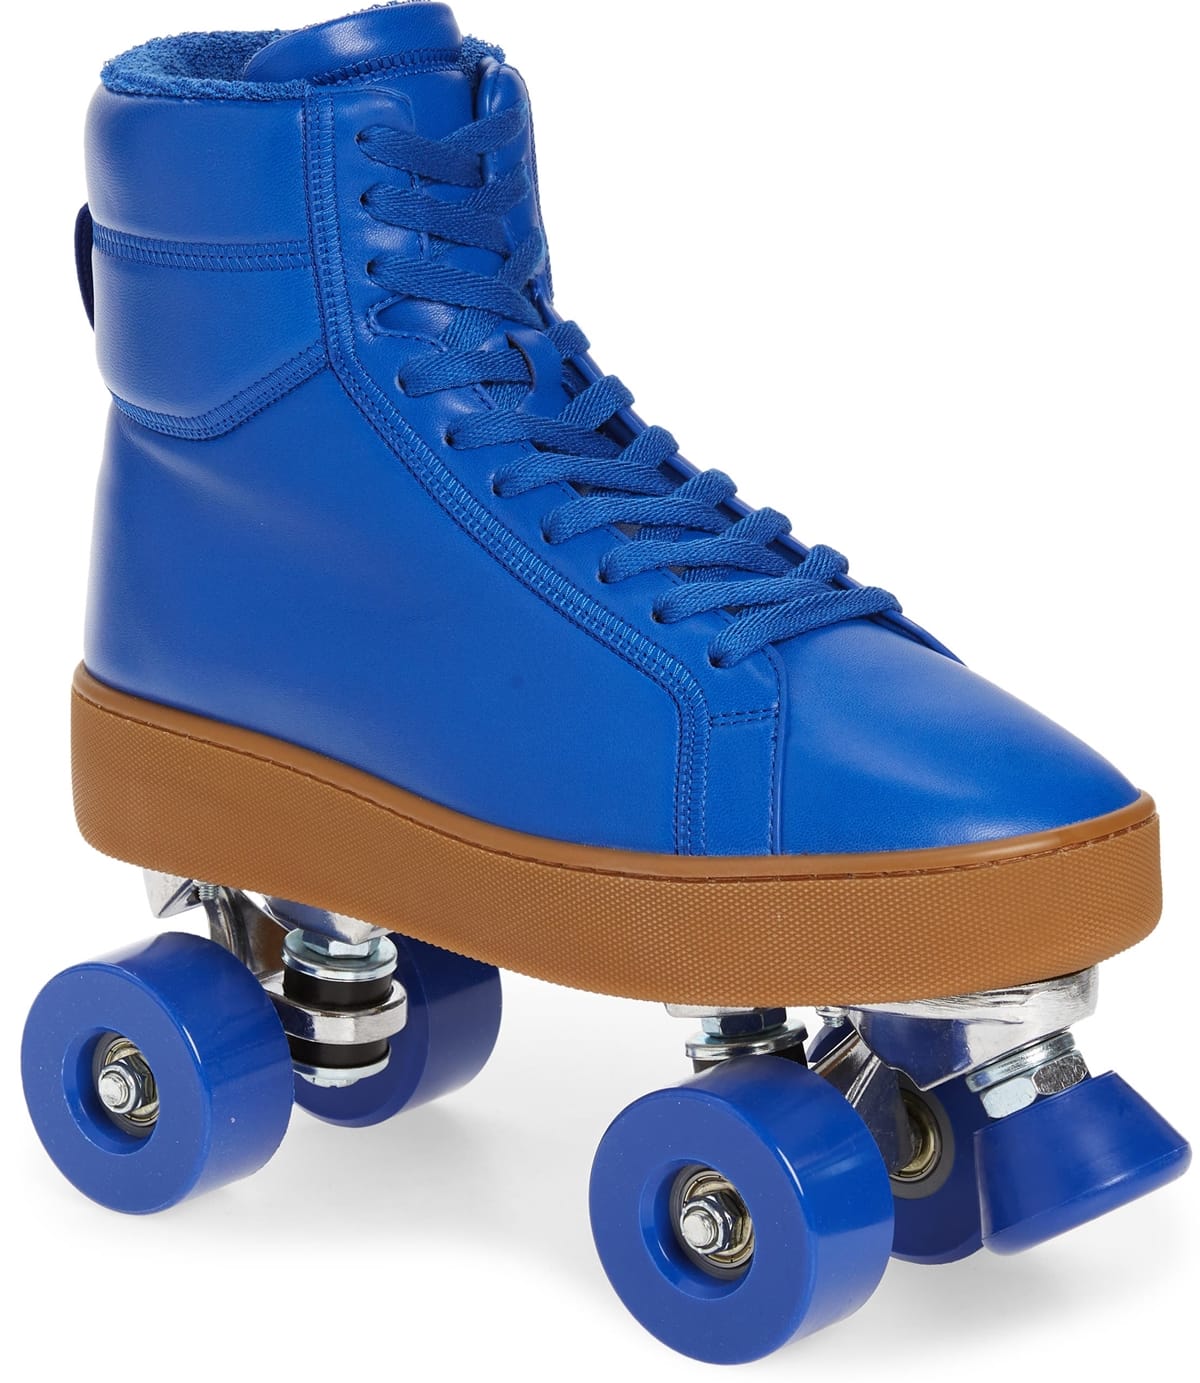 Bottega Veneta's blue roller skates with a comfy quilted-leather high-top as the boot